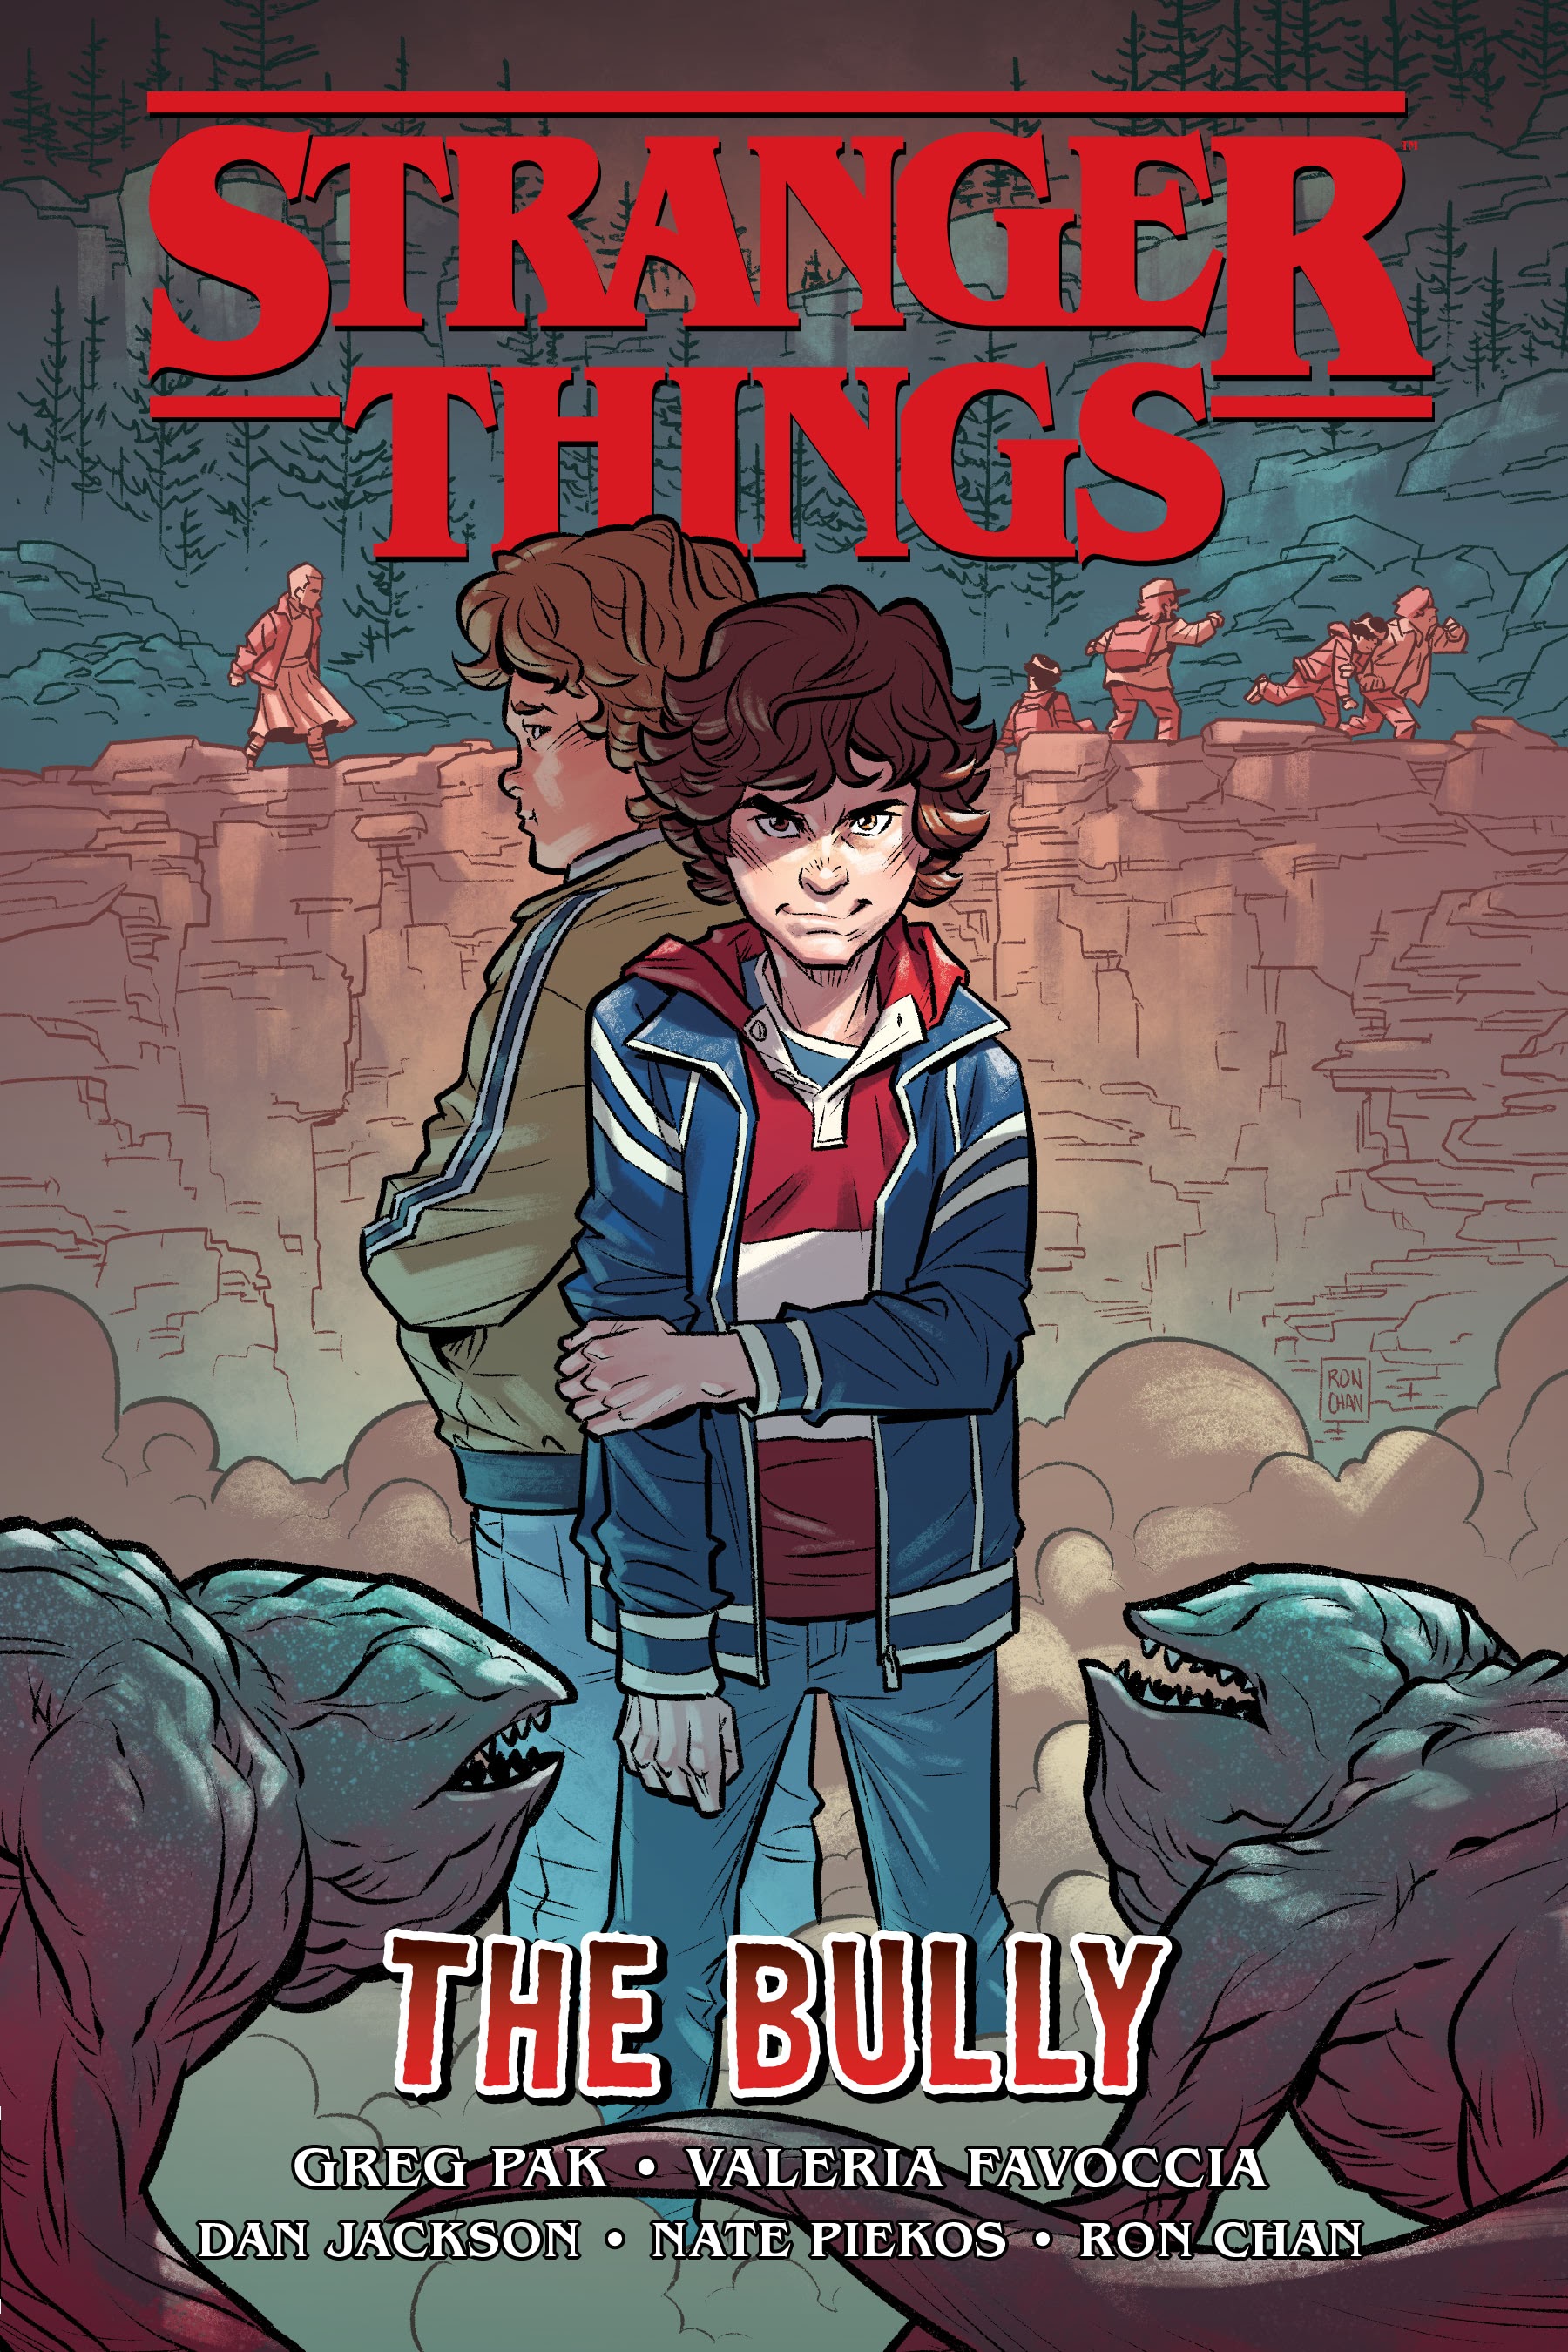 Read online Stranger Things: The Bully comic -  Issue # TPB - 1